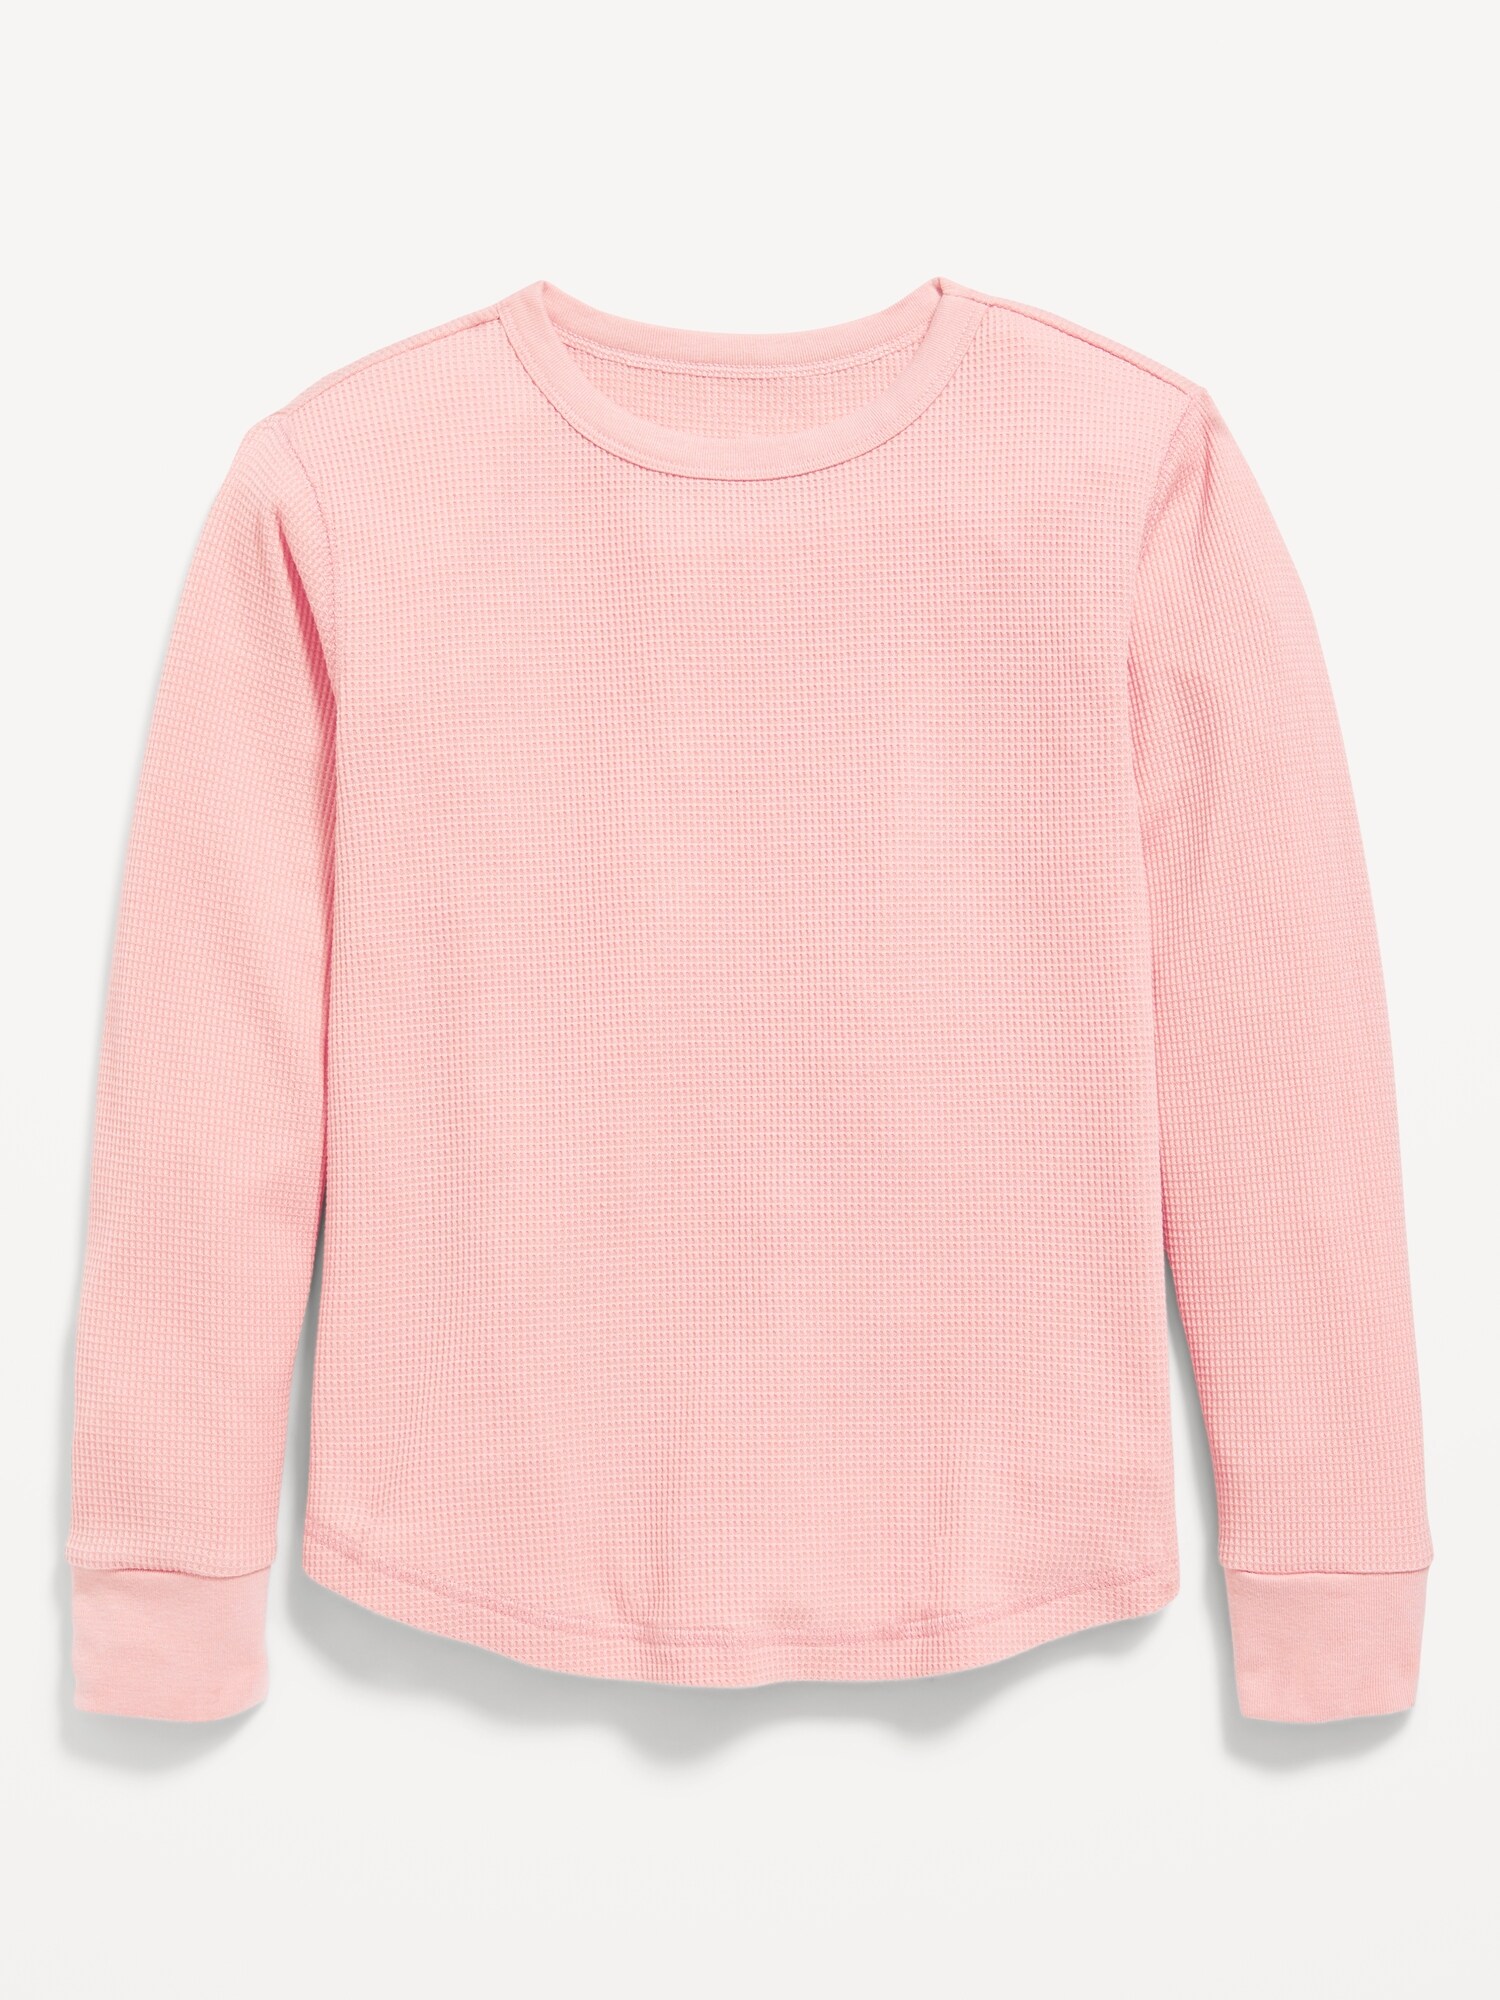 Long-Sleeve Thermal-Knit T-Shirt for Boys | Old Navy